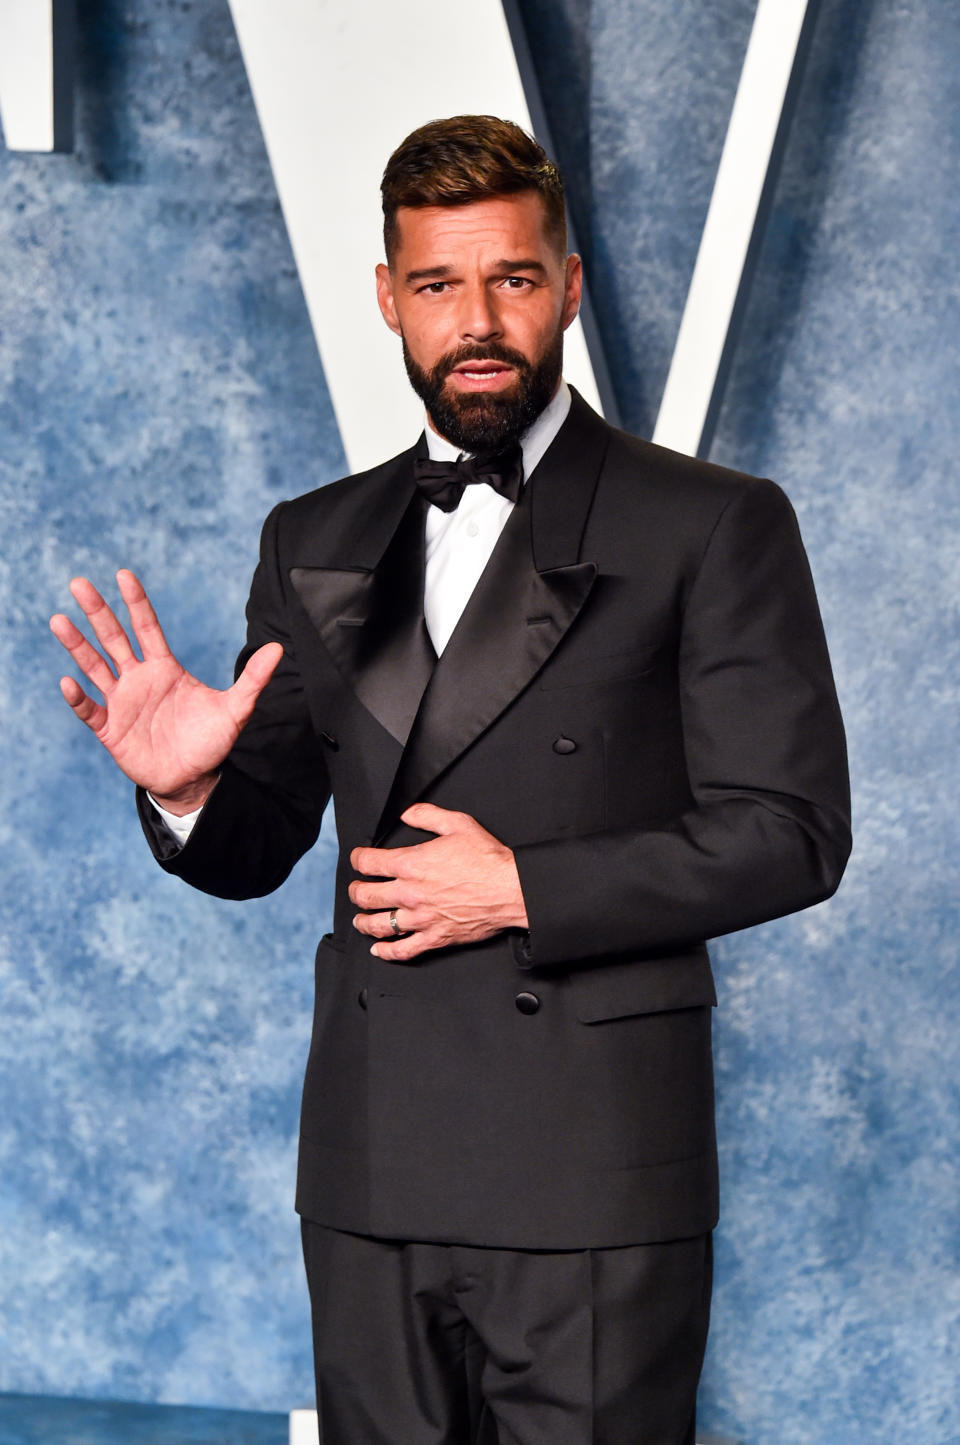 Ricky Martin at the 2023 Vanity Fair Oscar Party held at the Wallis Annenberg Center for the Performing Arts on March 12, 2023 in Beverly Hills, California.